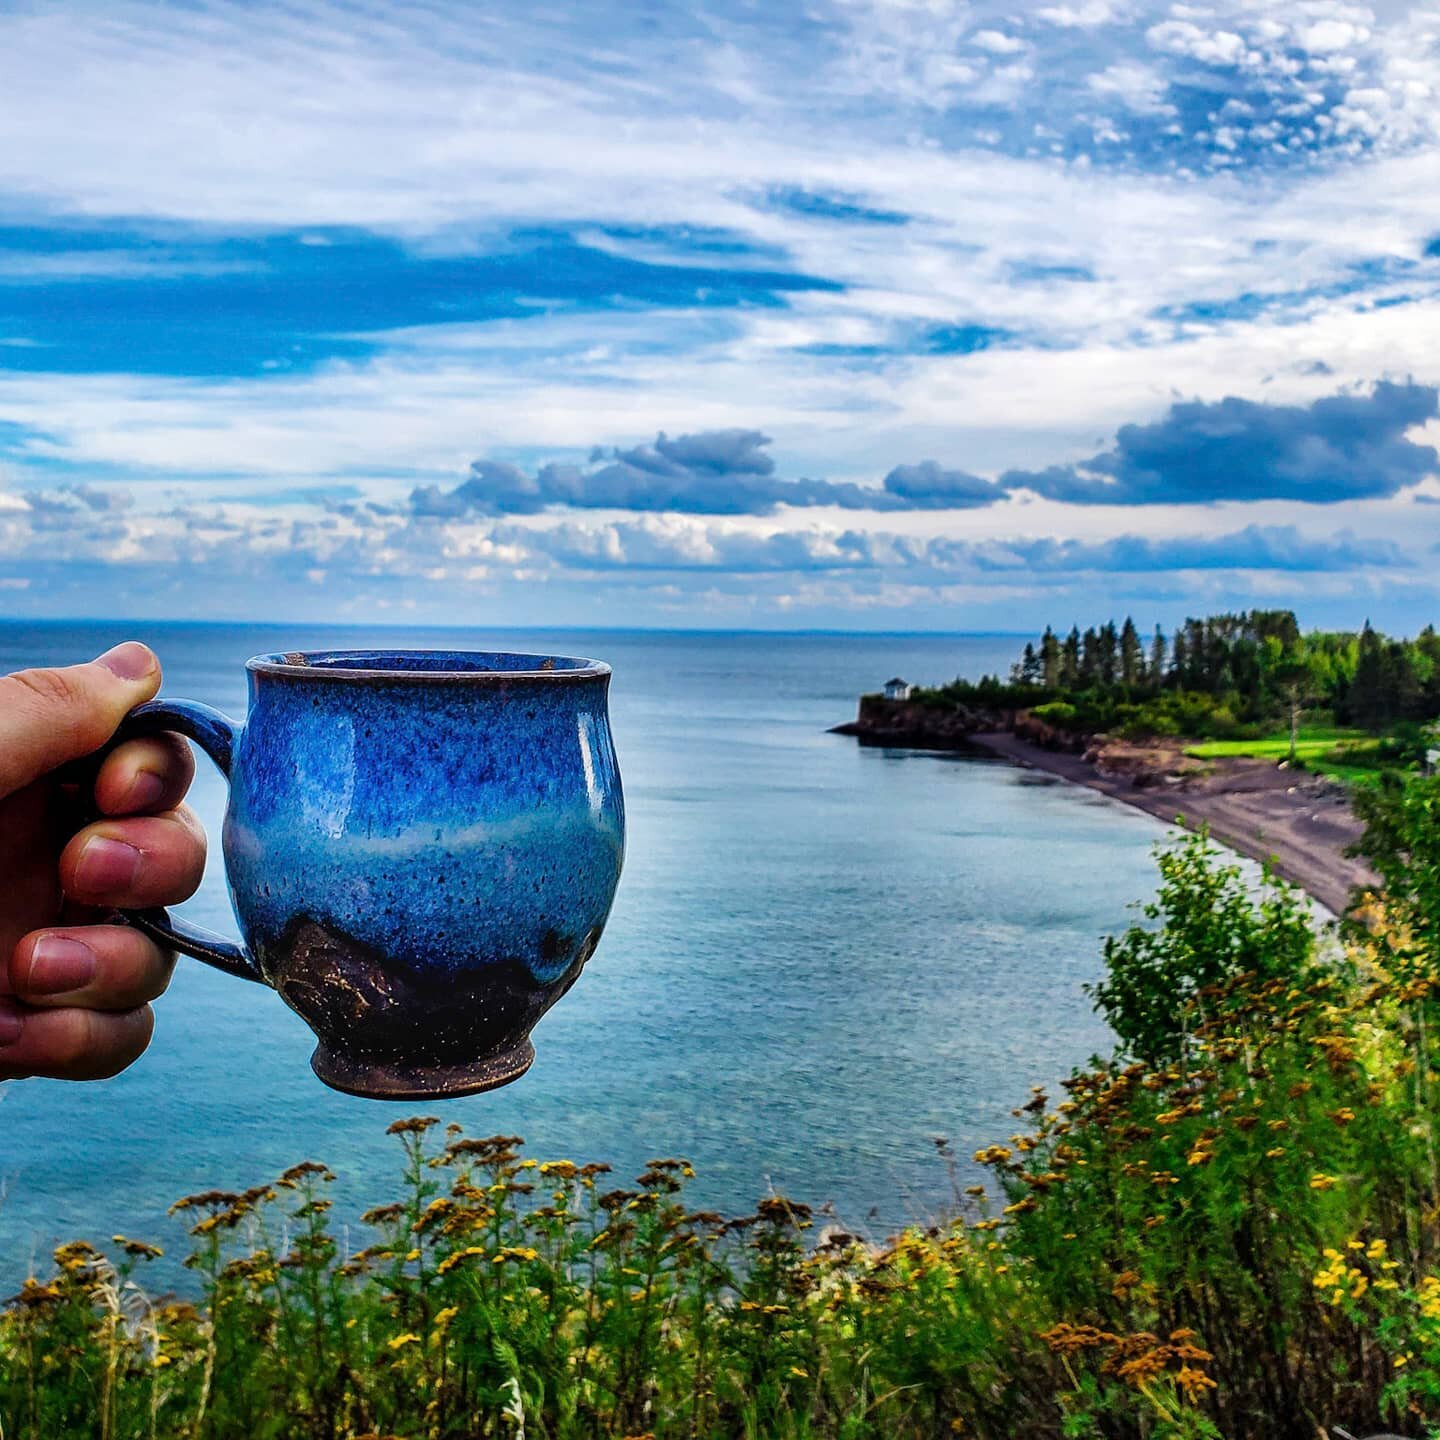 Getting lost in the North Shore with a mug
.
.
.
.
.
#travelphotography #mnwild #coffee #beach #hikevibes #mugshot #hike #potterylove #northshore #coffeelover #potterylife #hikelife #freshwater #natureshot #coffeeaddict #pottery #hikersofinstagram #t